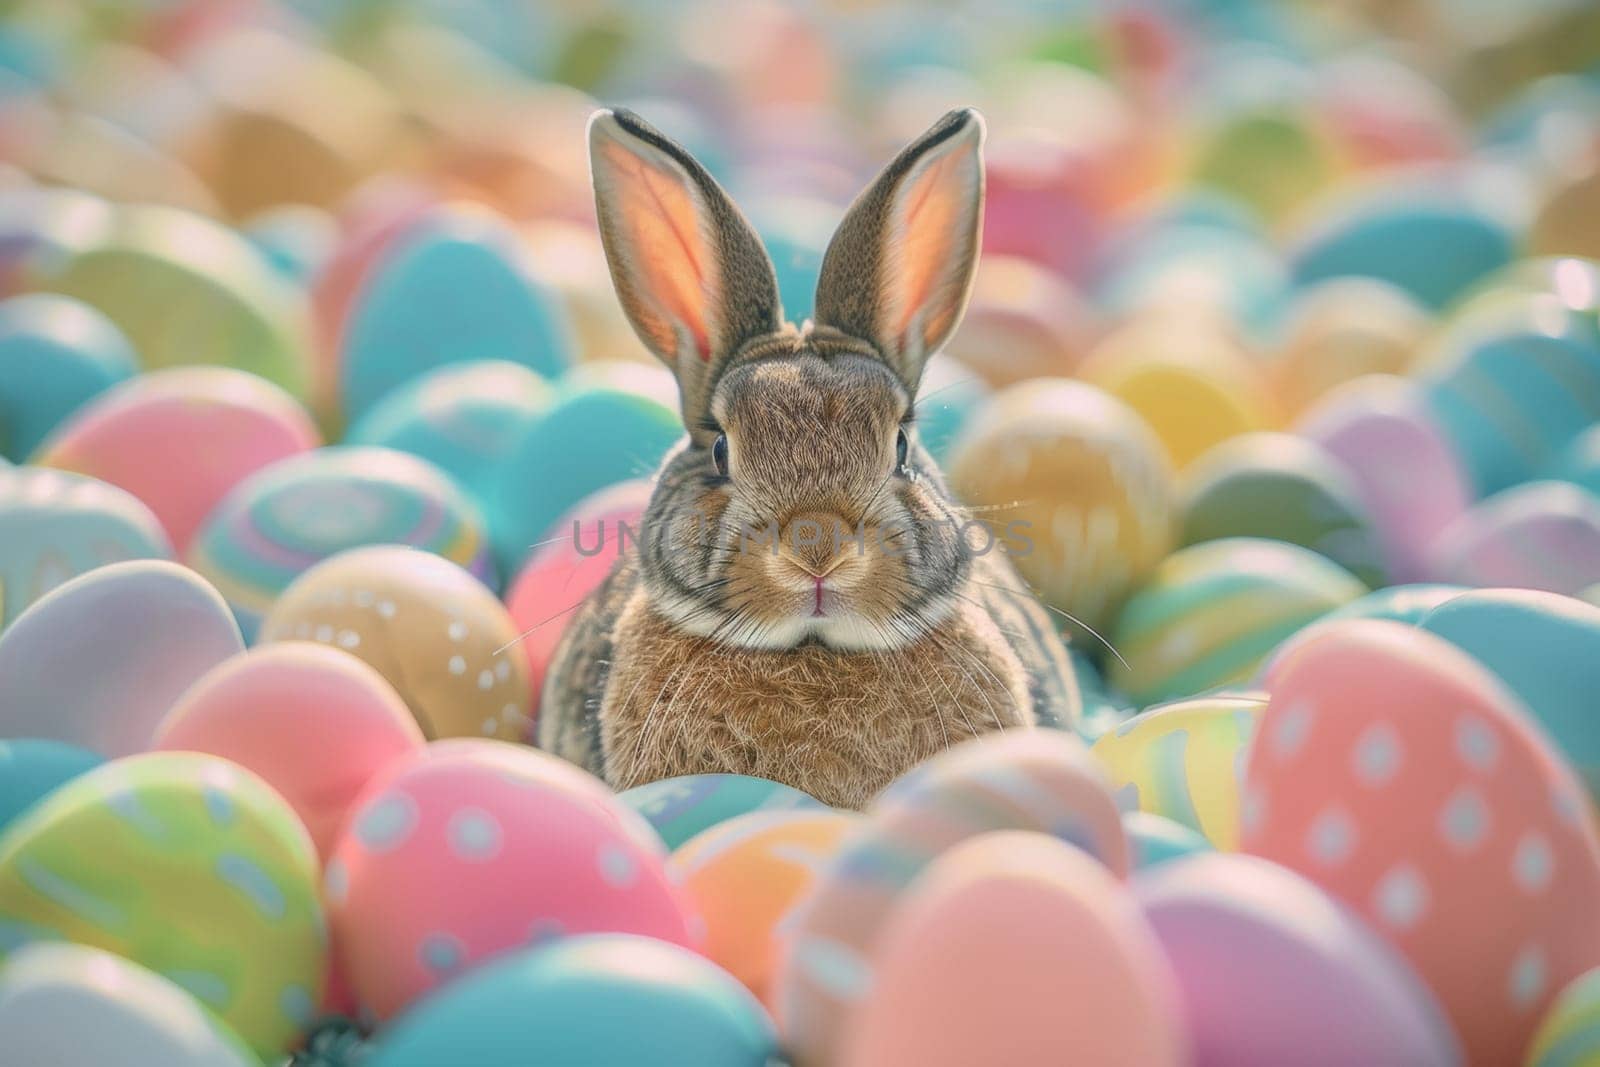 A rabbit is sitting in a pile of Easter eggs by nateemee